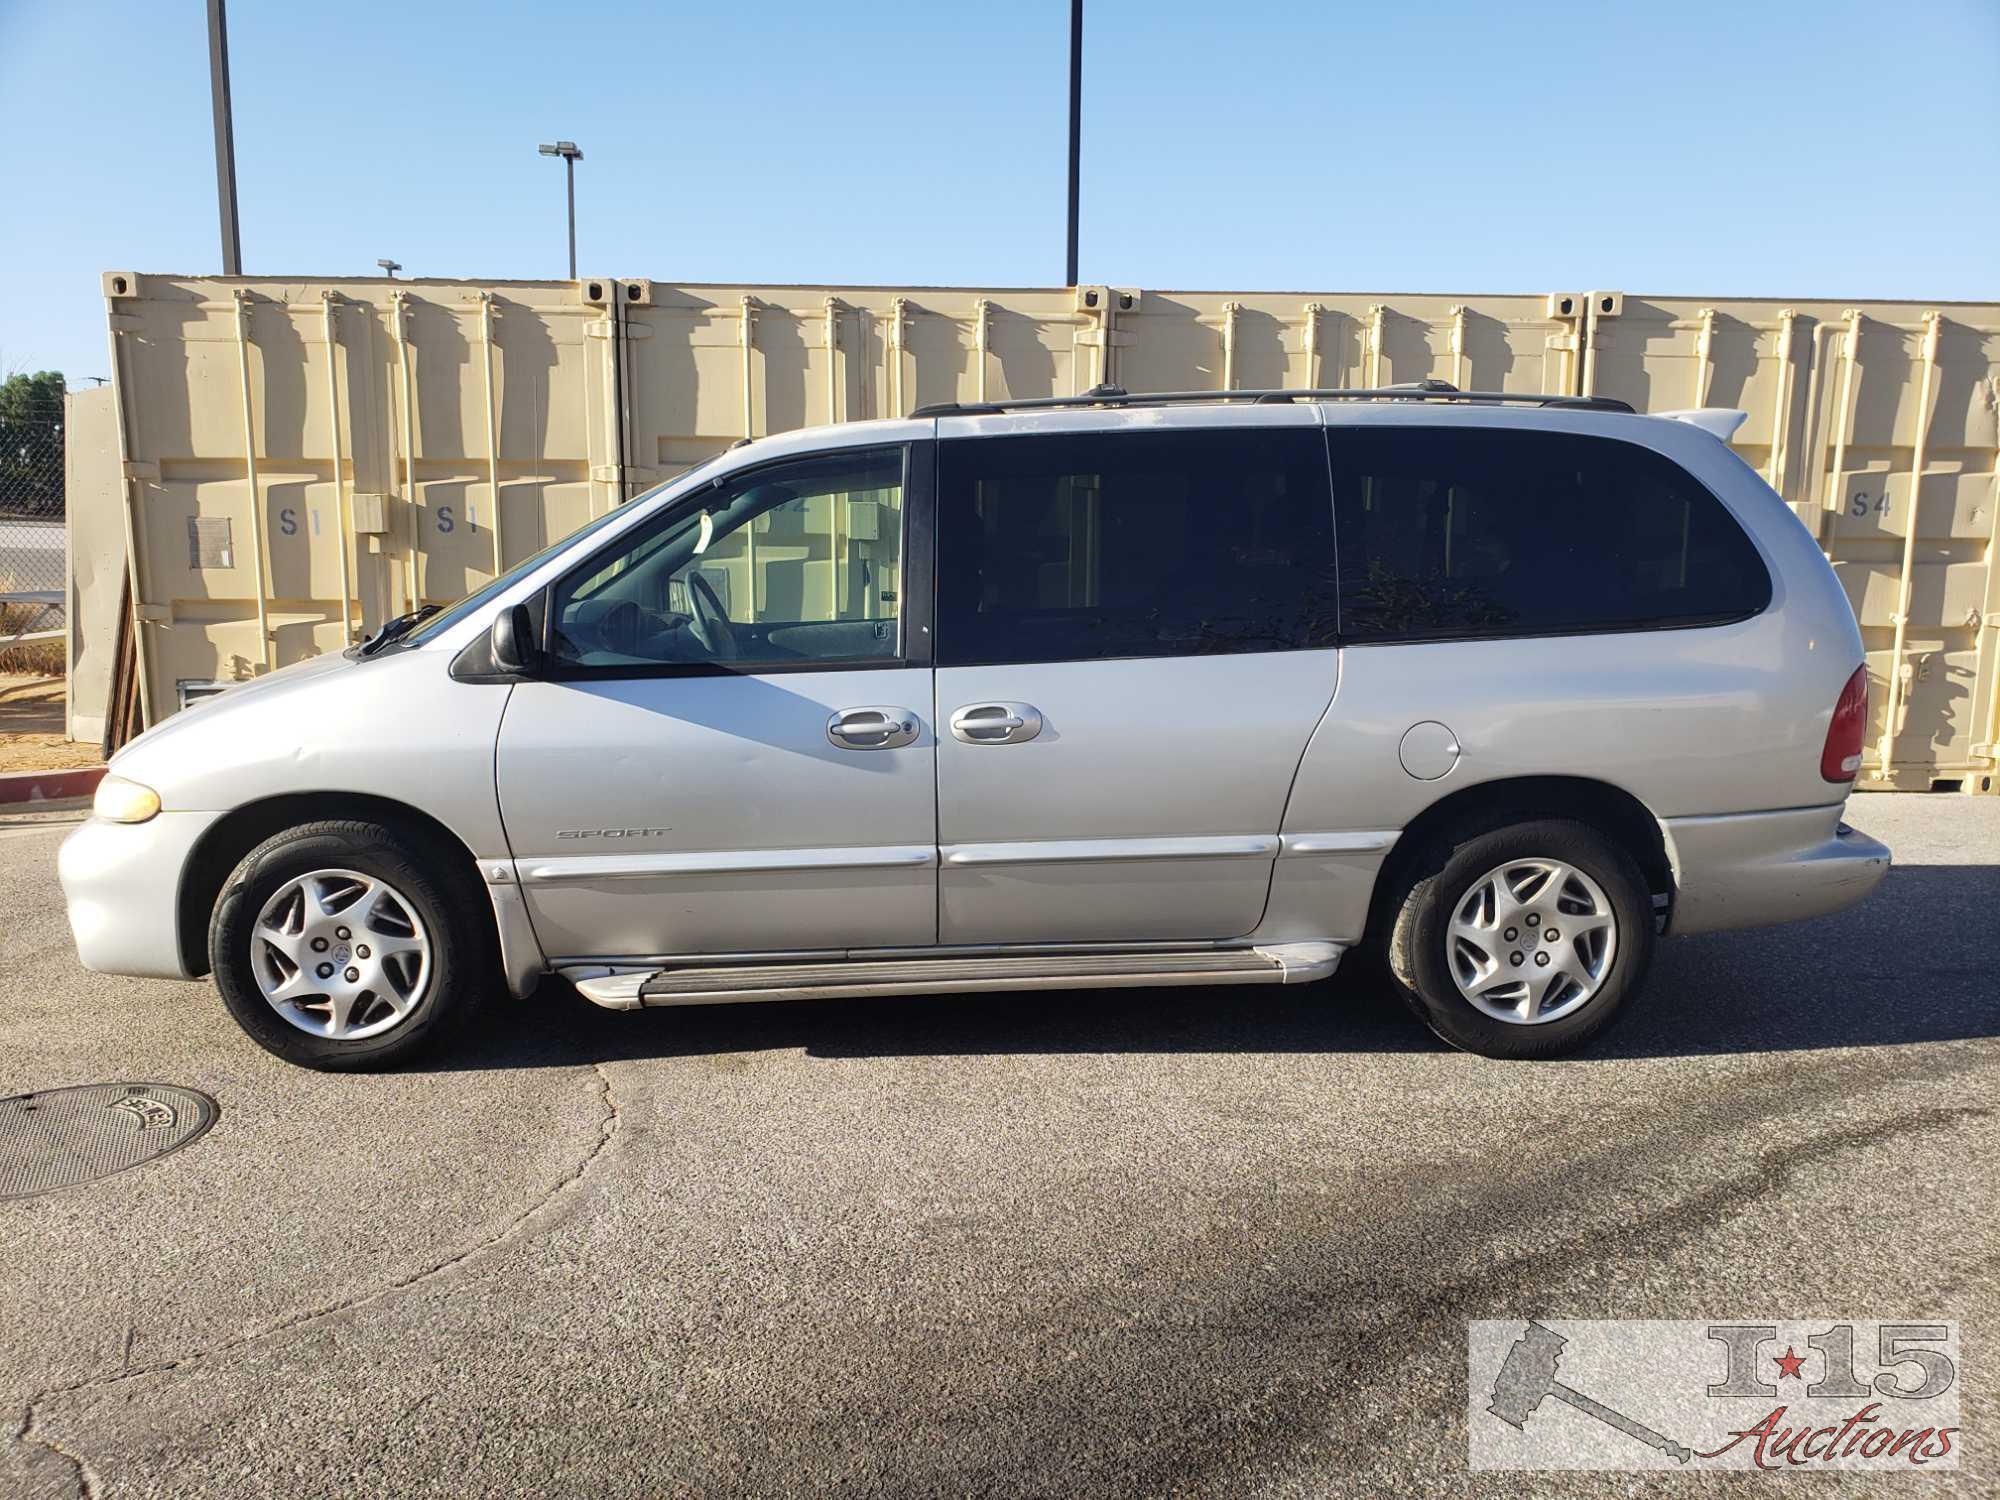 2000 Dodge Grand Caravan SE Ice Cold Air. Please See Video! Dealer or Out of State Only!!